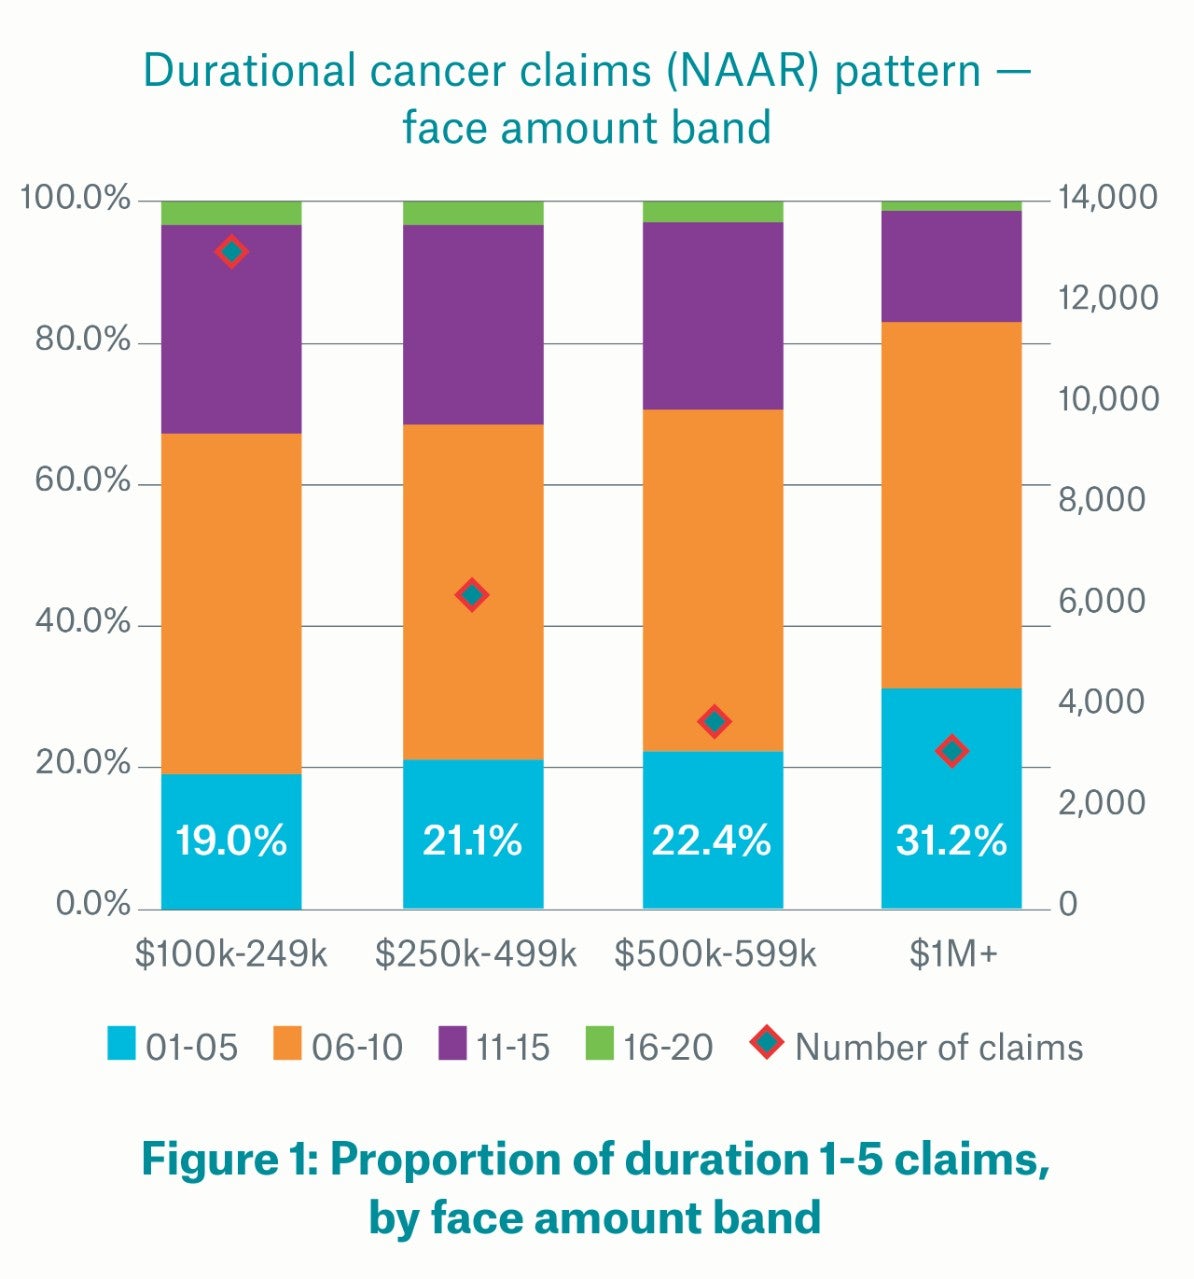 Figure 1 Proportion of duration 1-5 claims by face amount band